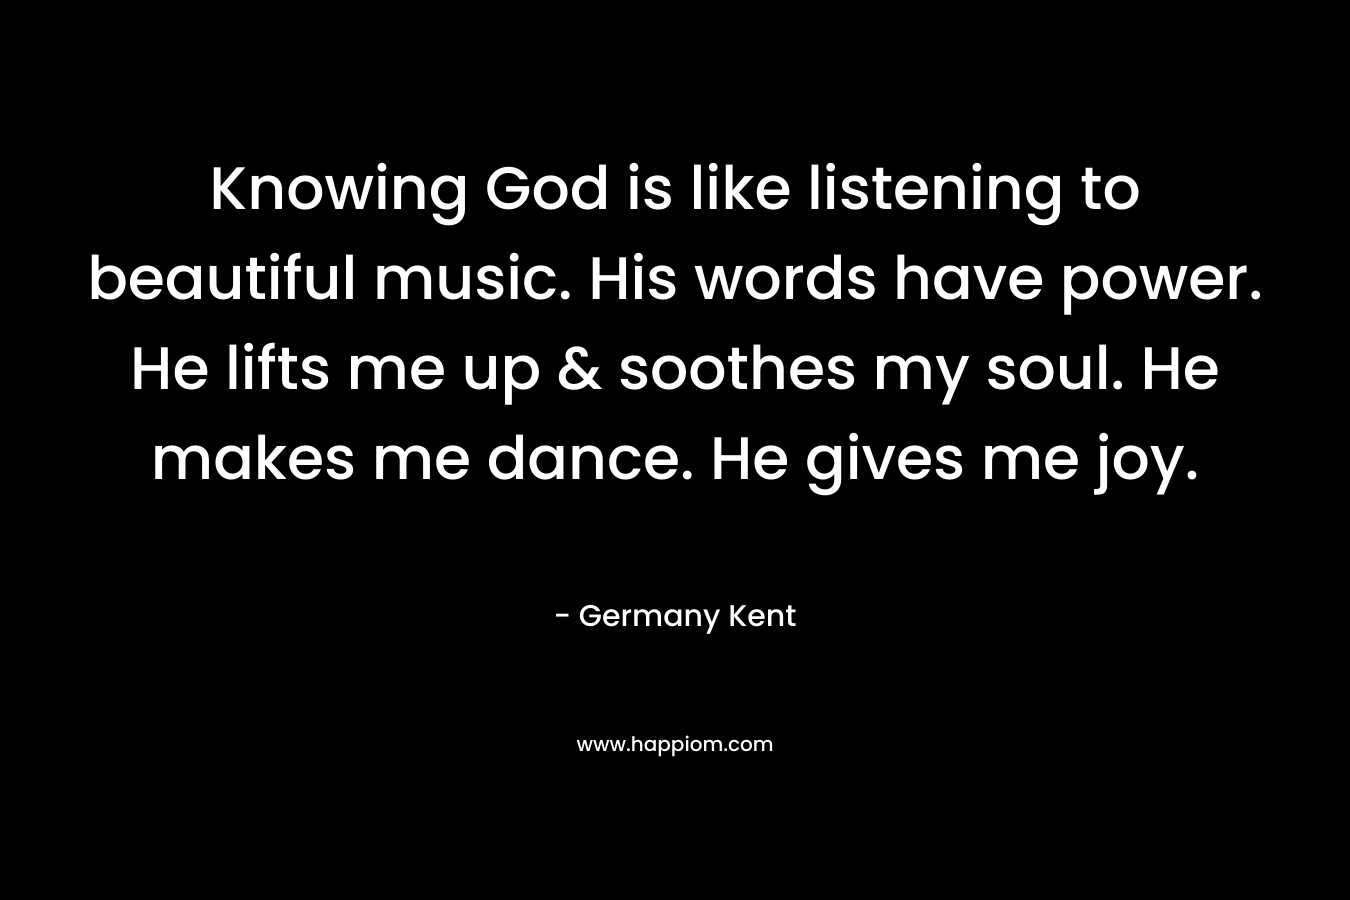 Knowing God is like listening to beautiful music. His words have power. He lifts me up & soothes my soul. He makes me dance. He gives me joy.